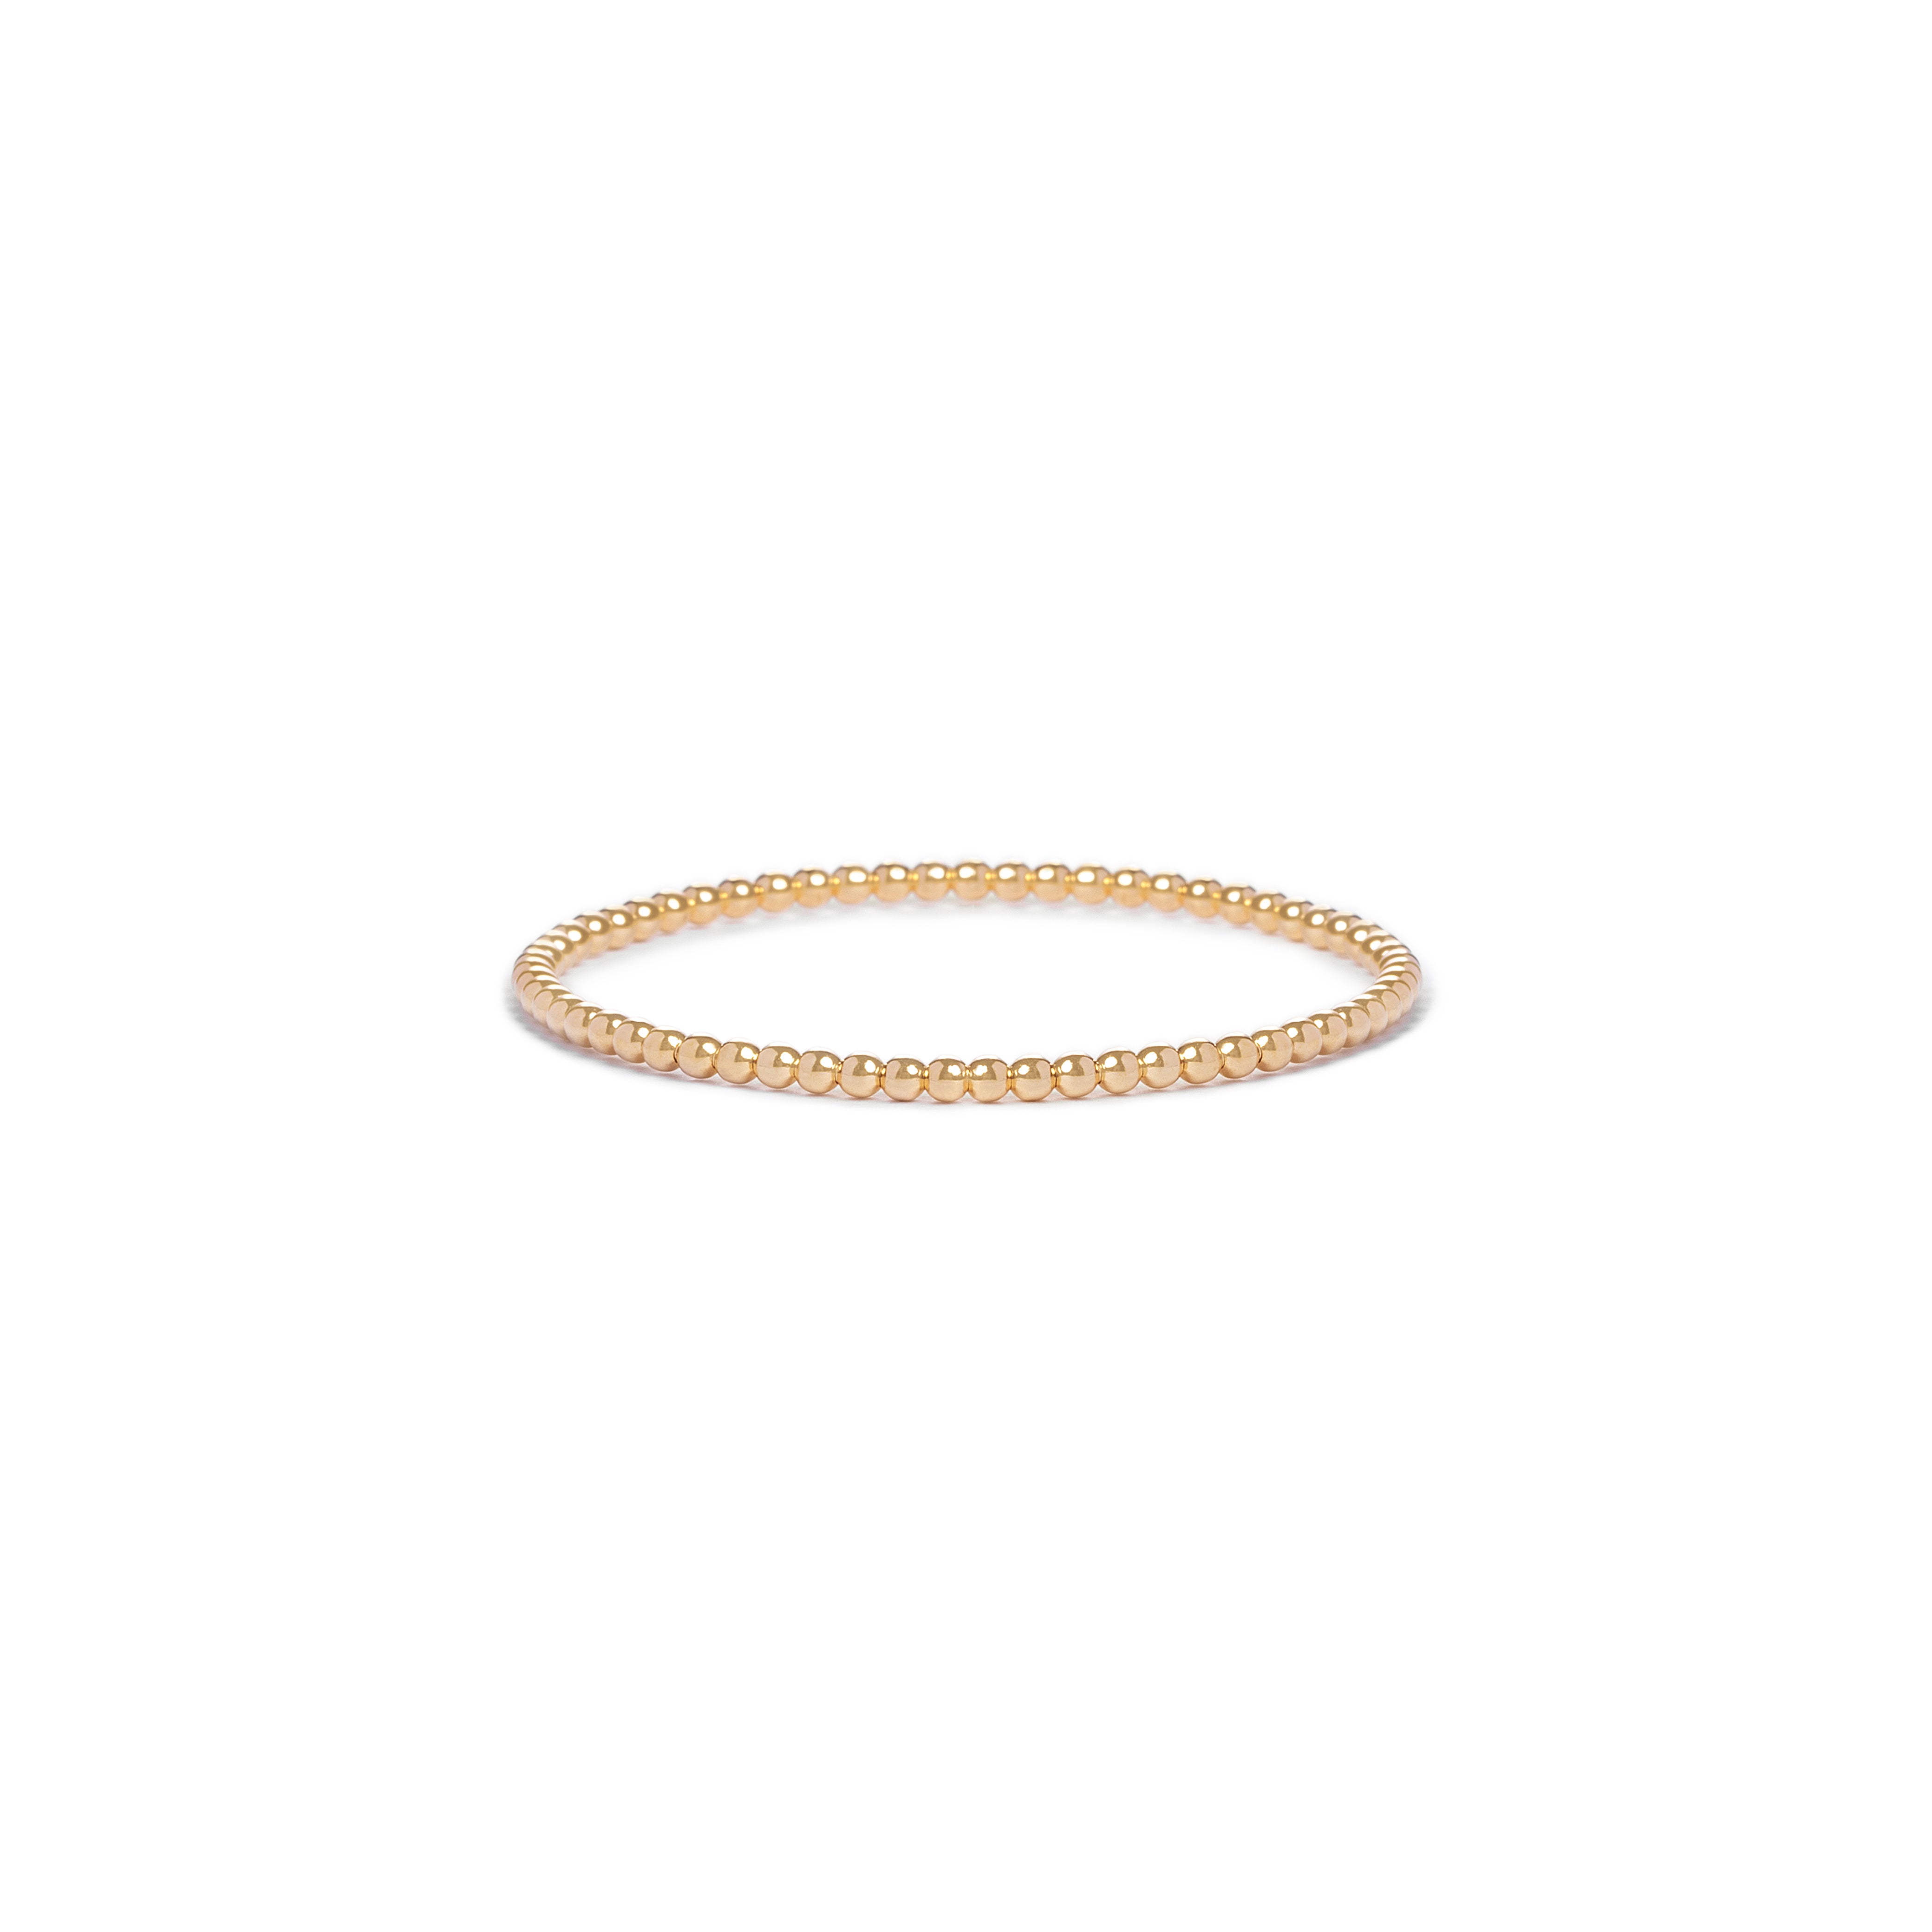 Pulseira Sitges ouro 18k